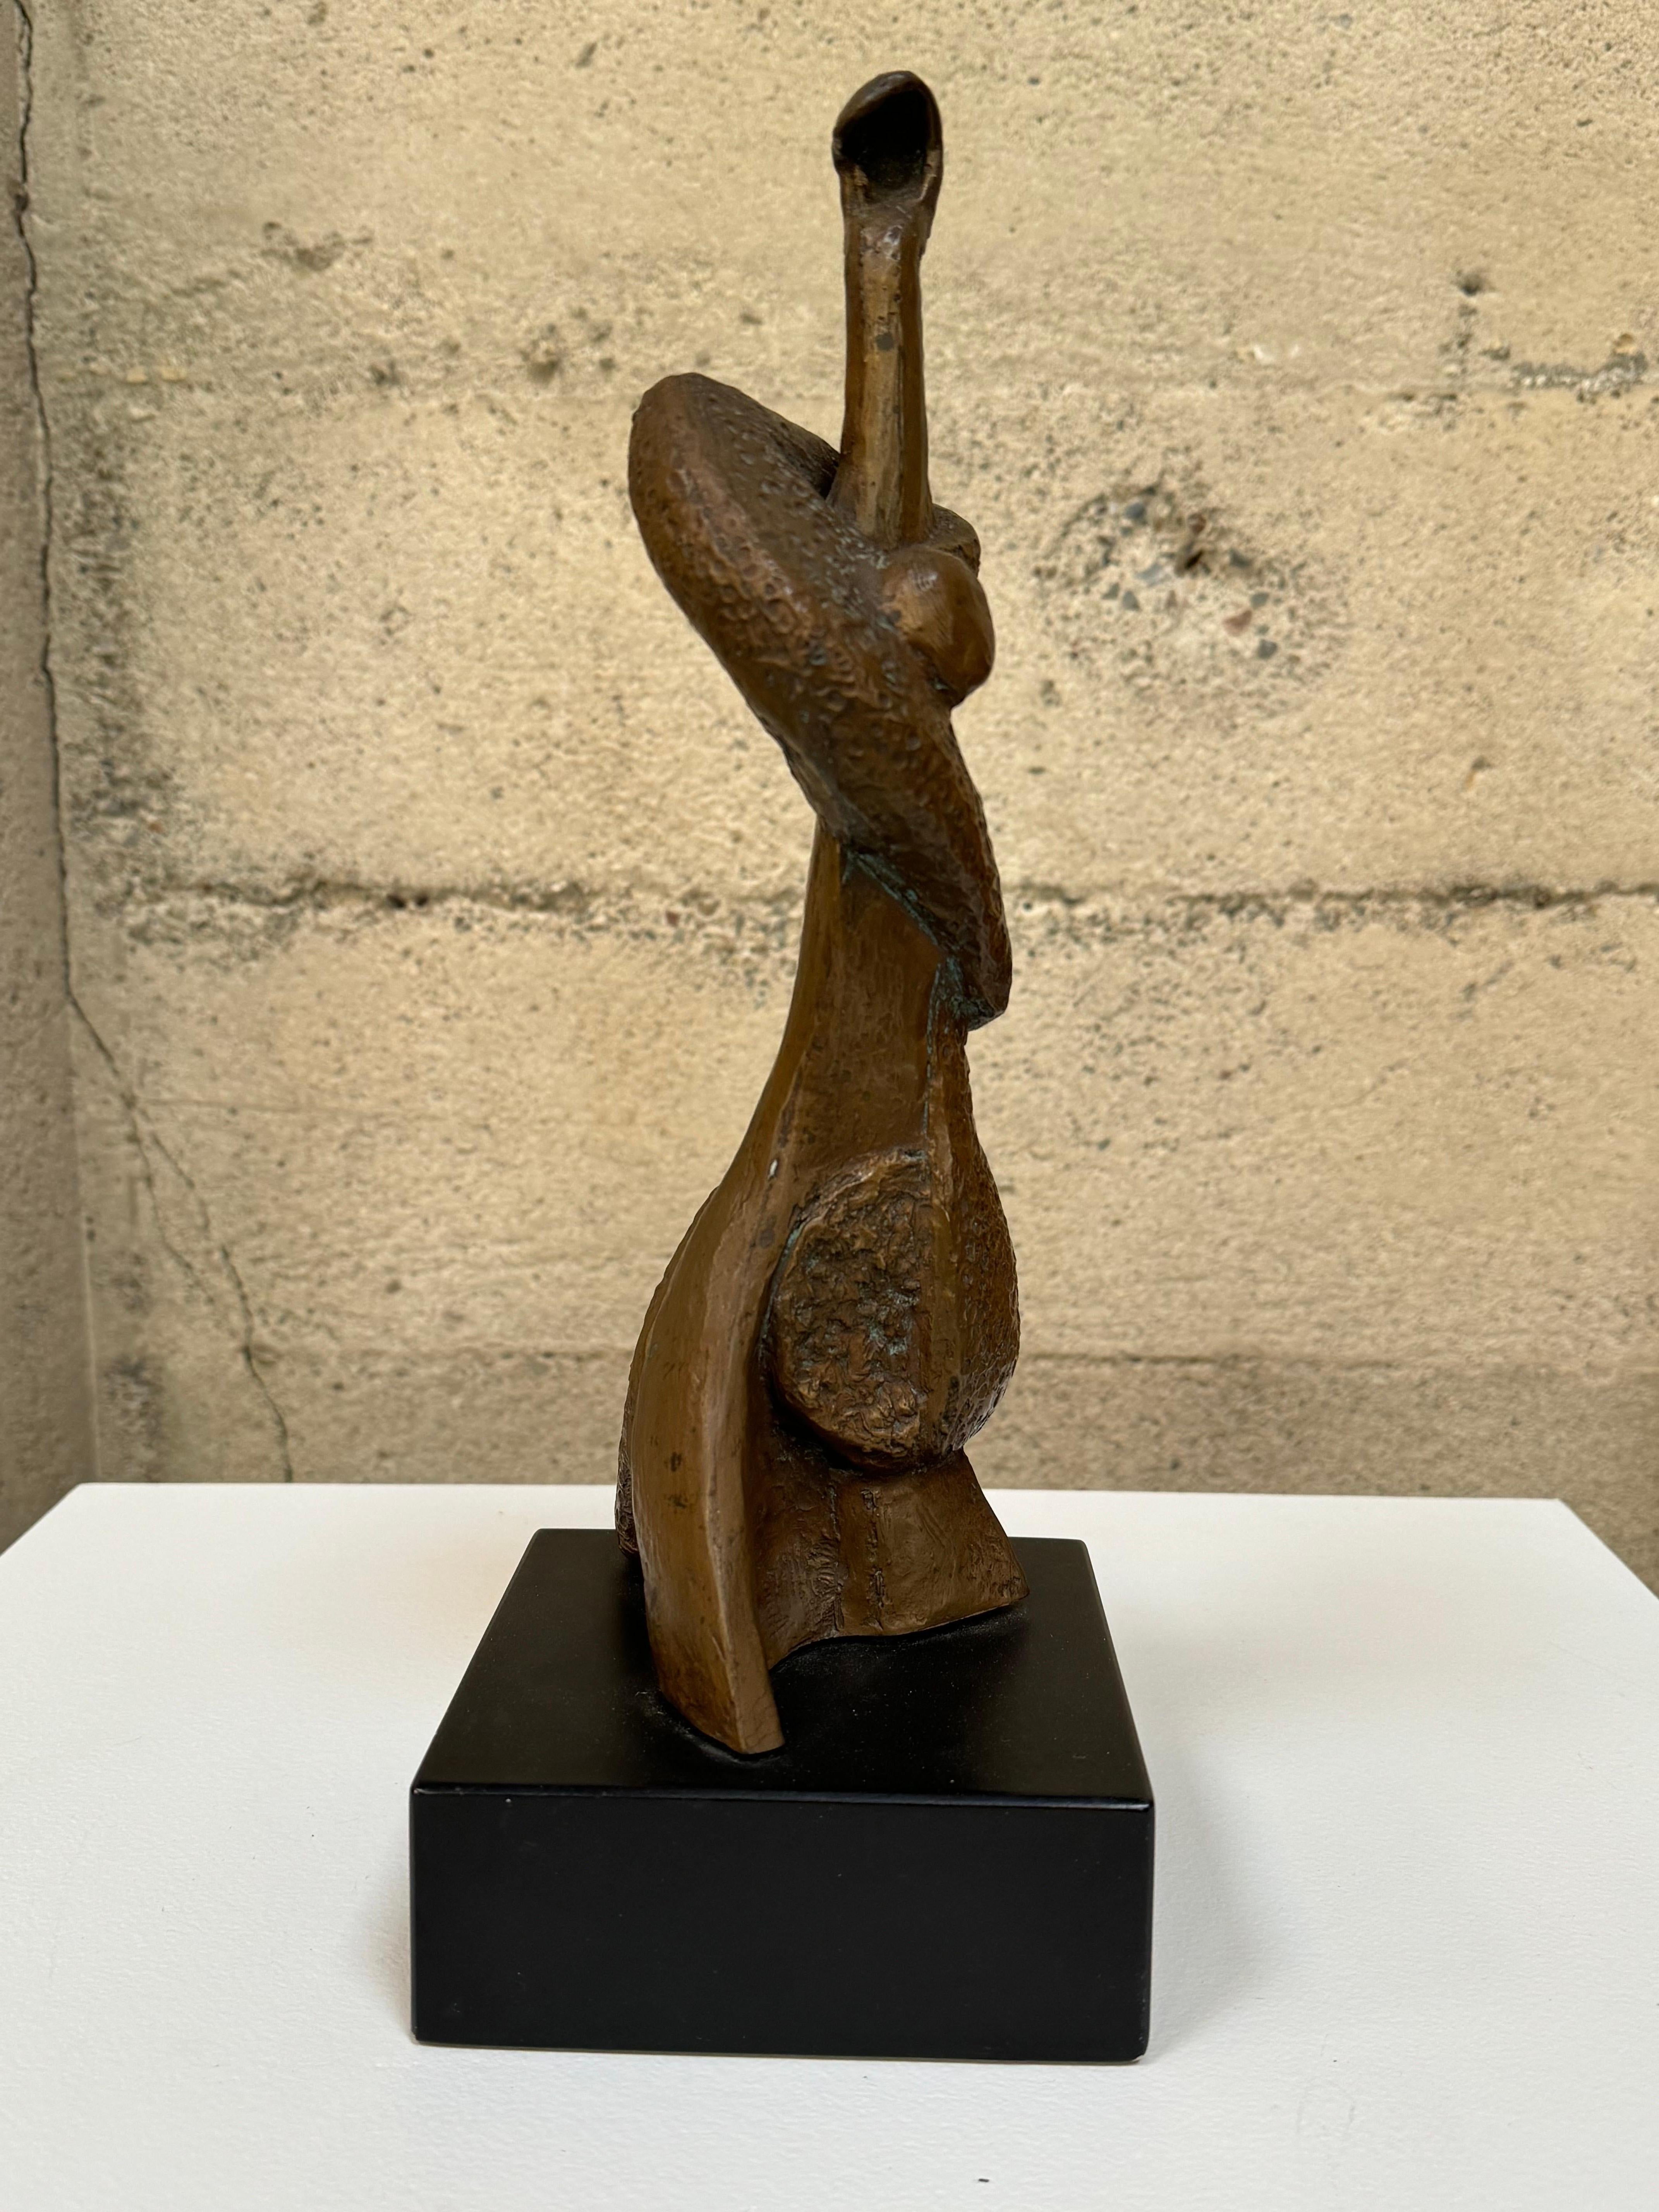 Signed cast bronze sculpture by Irma Stoloff and numbered 236/300. Having textured finish figurative abstract sculpture of a upright Jazz bass player resting on painted wood base.